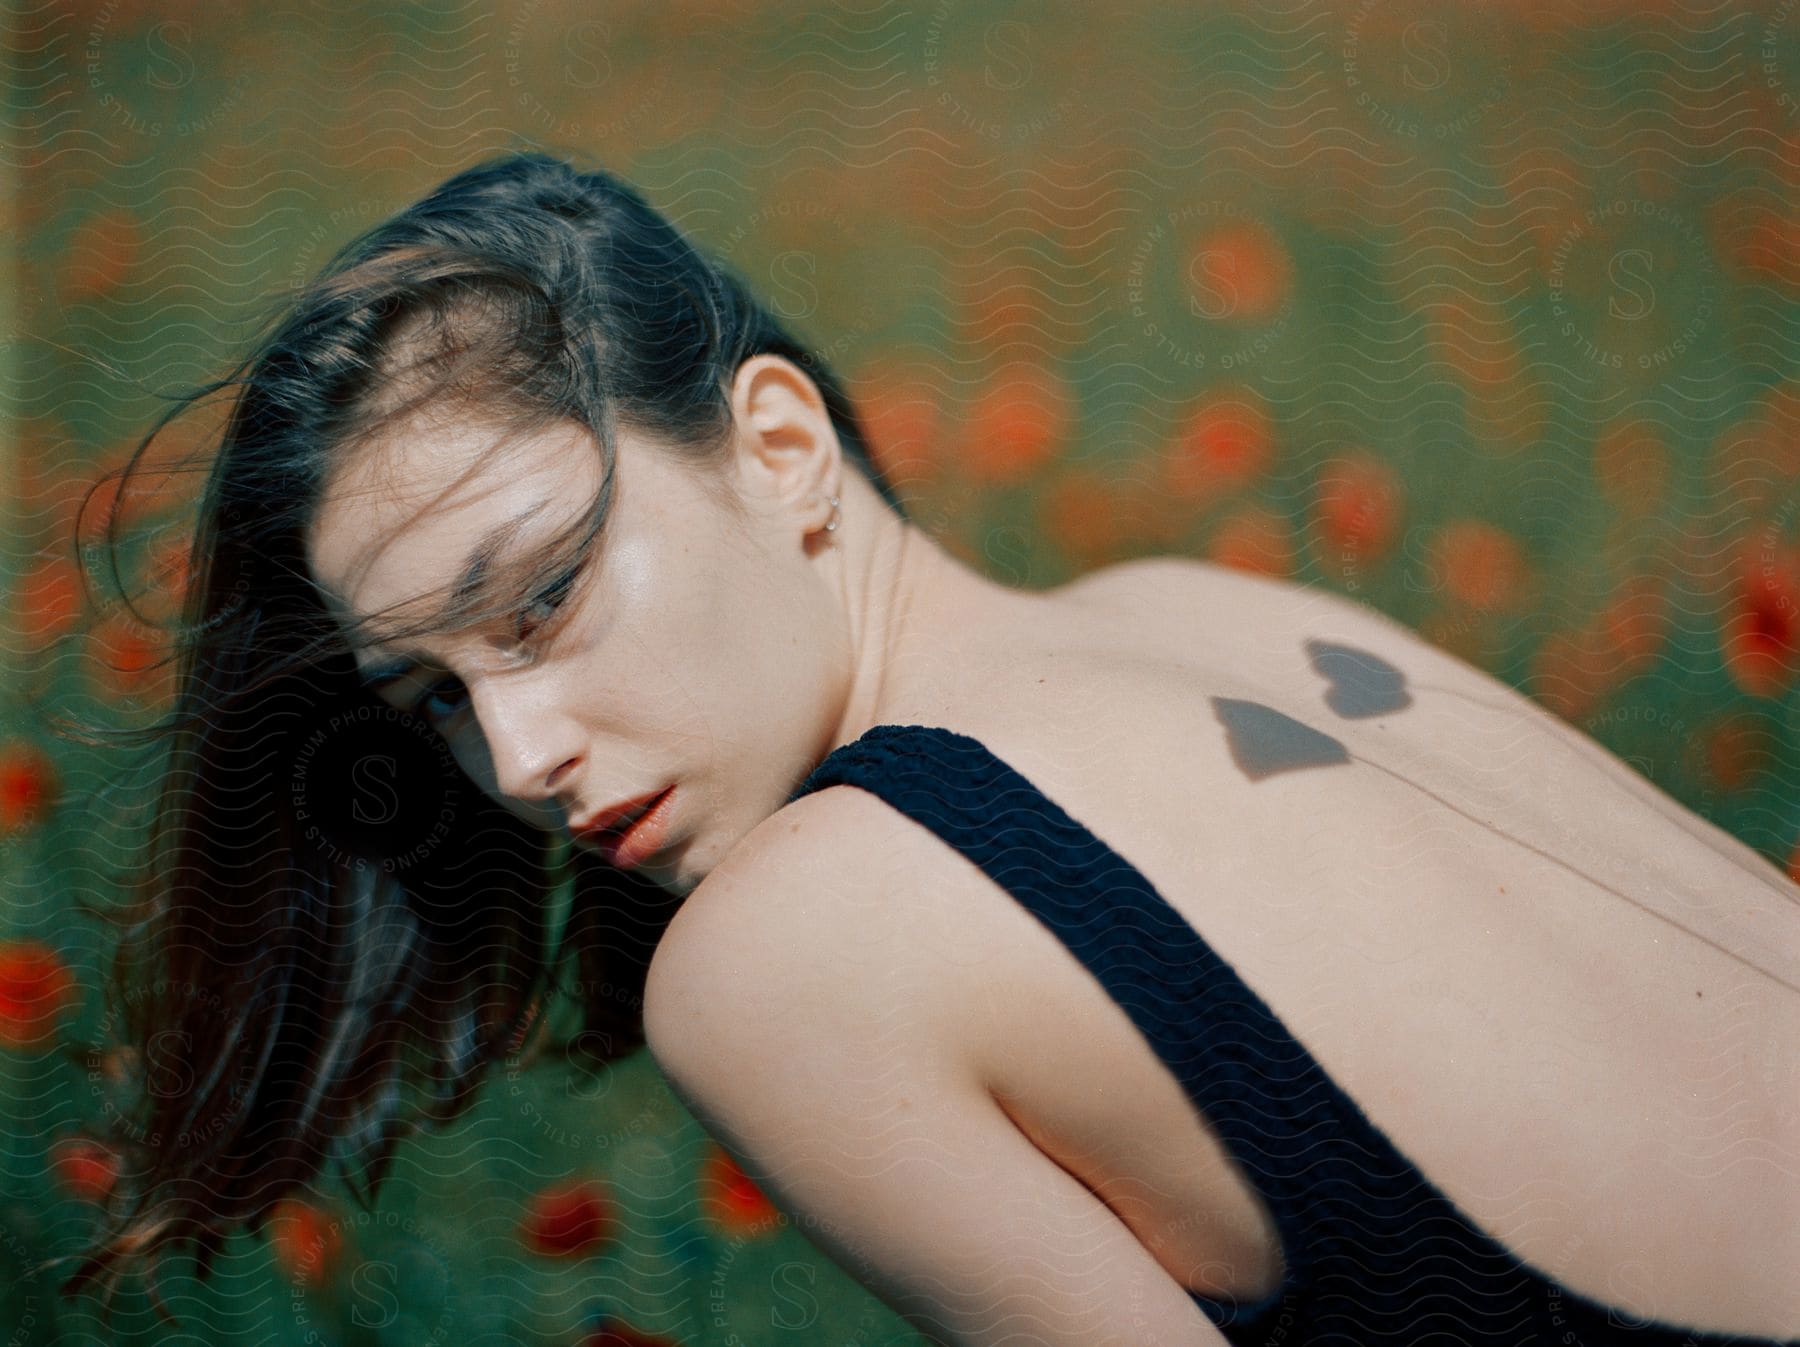 Woman with black dress and flower tattoos poses in red flower field